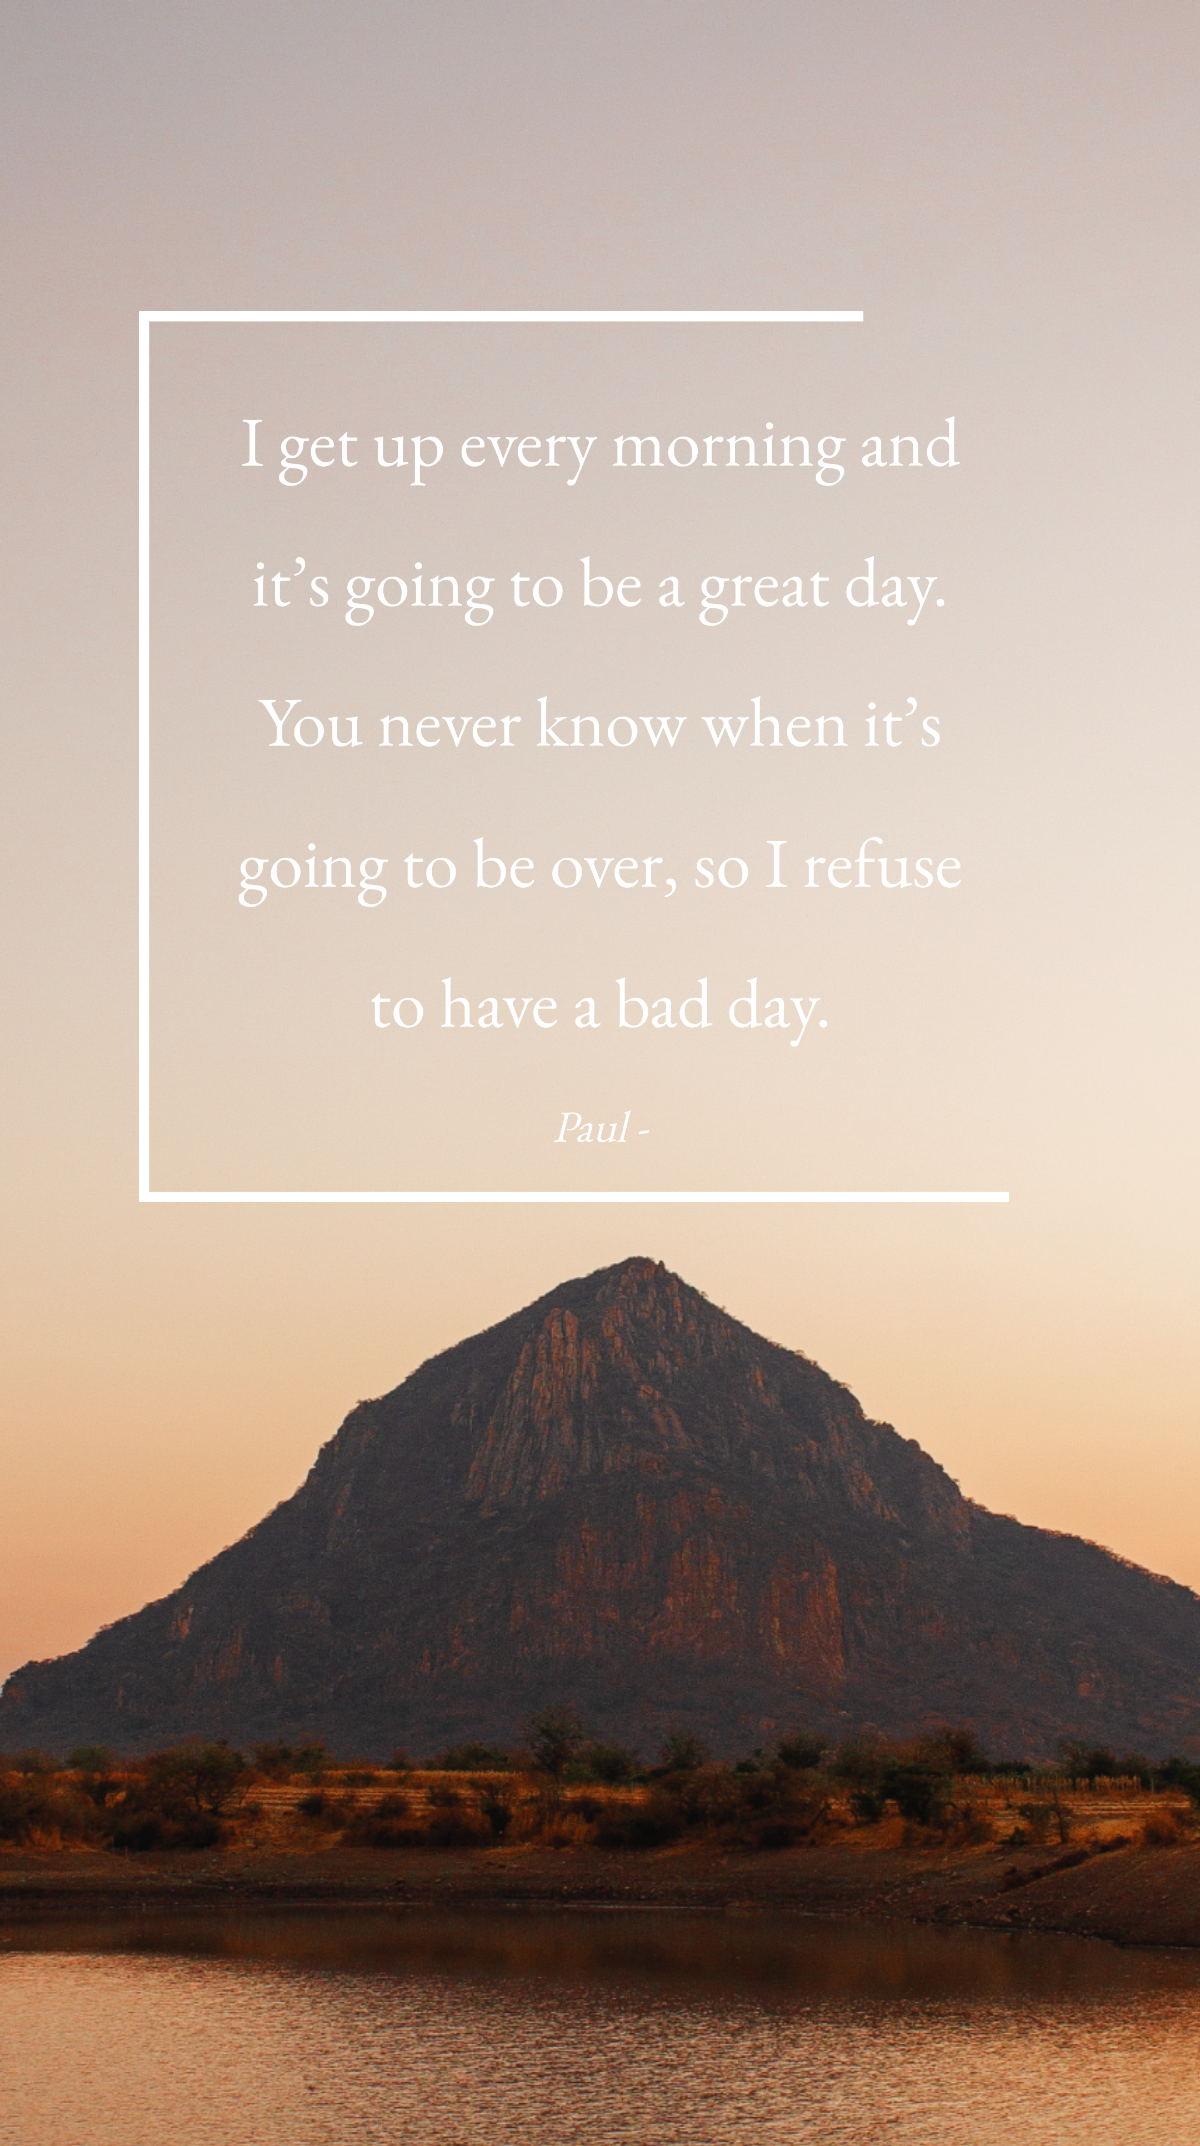 Paul - I get up every morning and it’s going to be a great day. You never know when it’s going to be over, so I refuse to have a bad day. Template